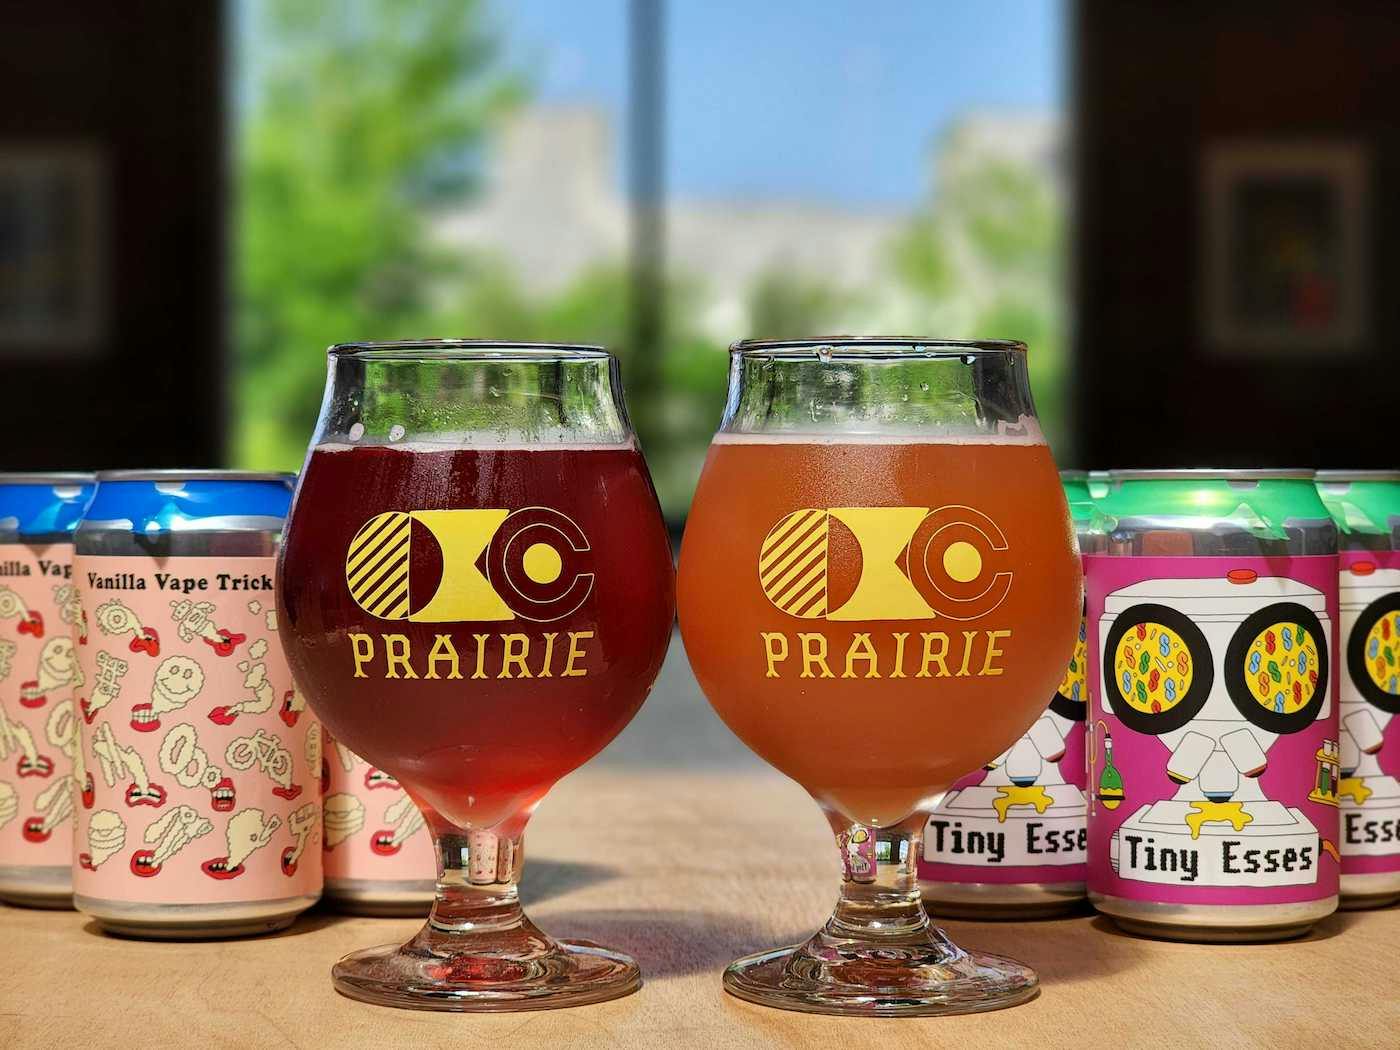 Two glasses of Prairie beers in logo glasses on a wooden table, with 6-packs of cans behind